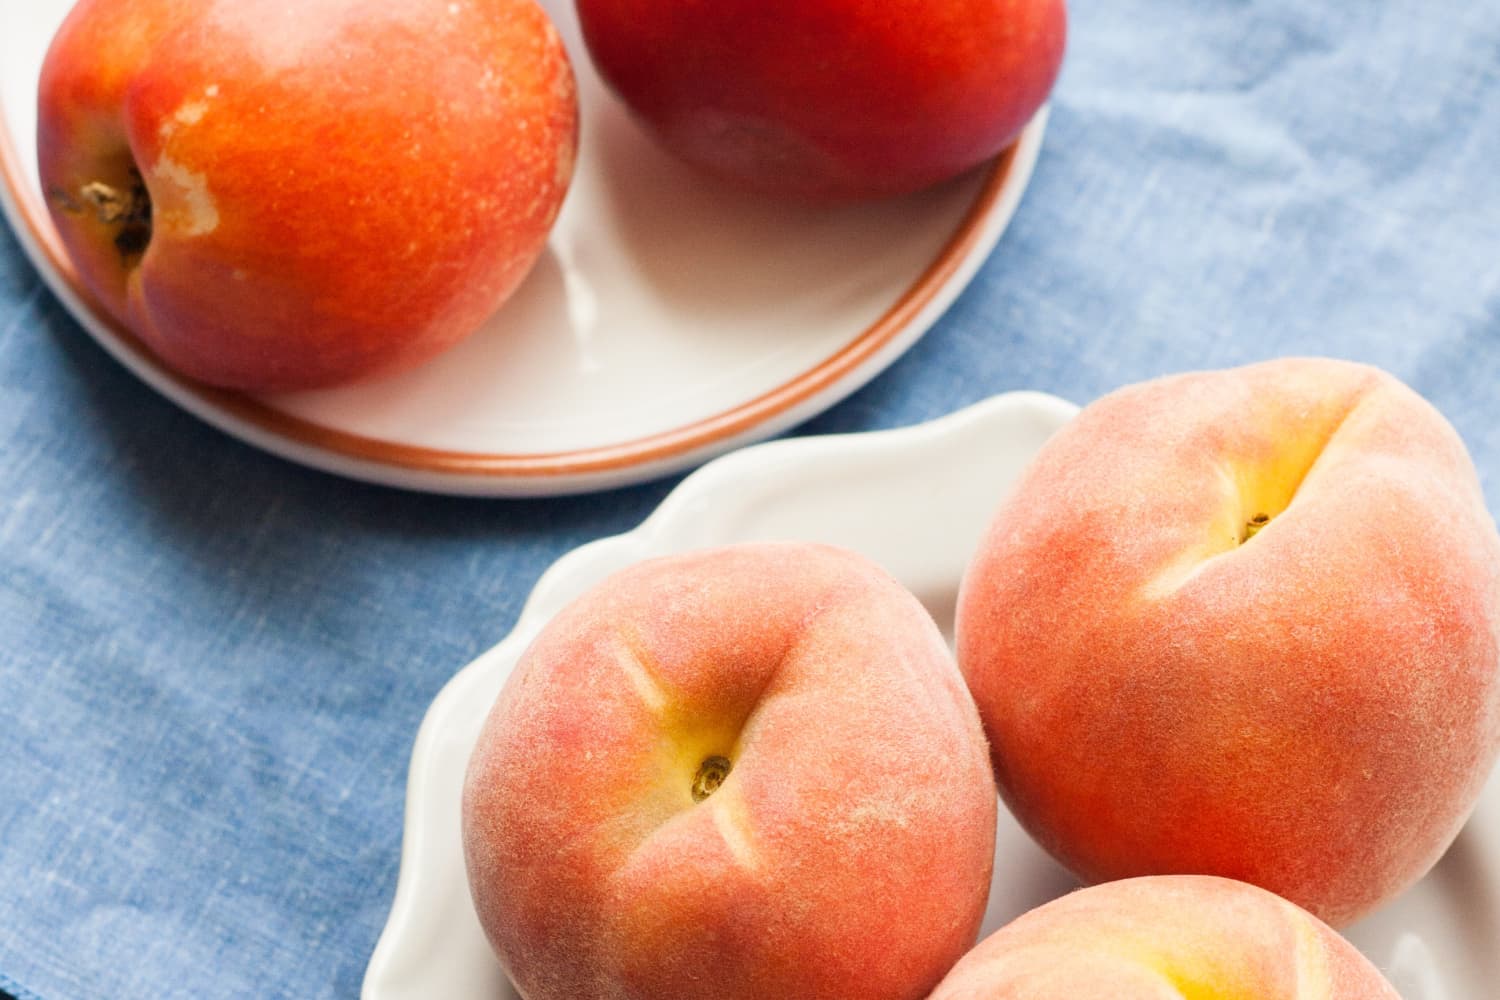 Can't Find Perfect Summer Peaches? Don't Sweat: Frozen Are Great, Too